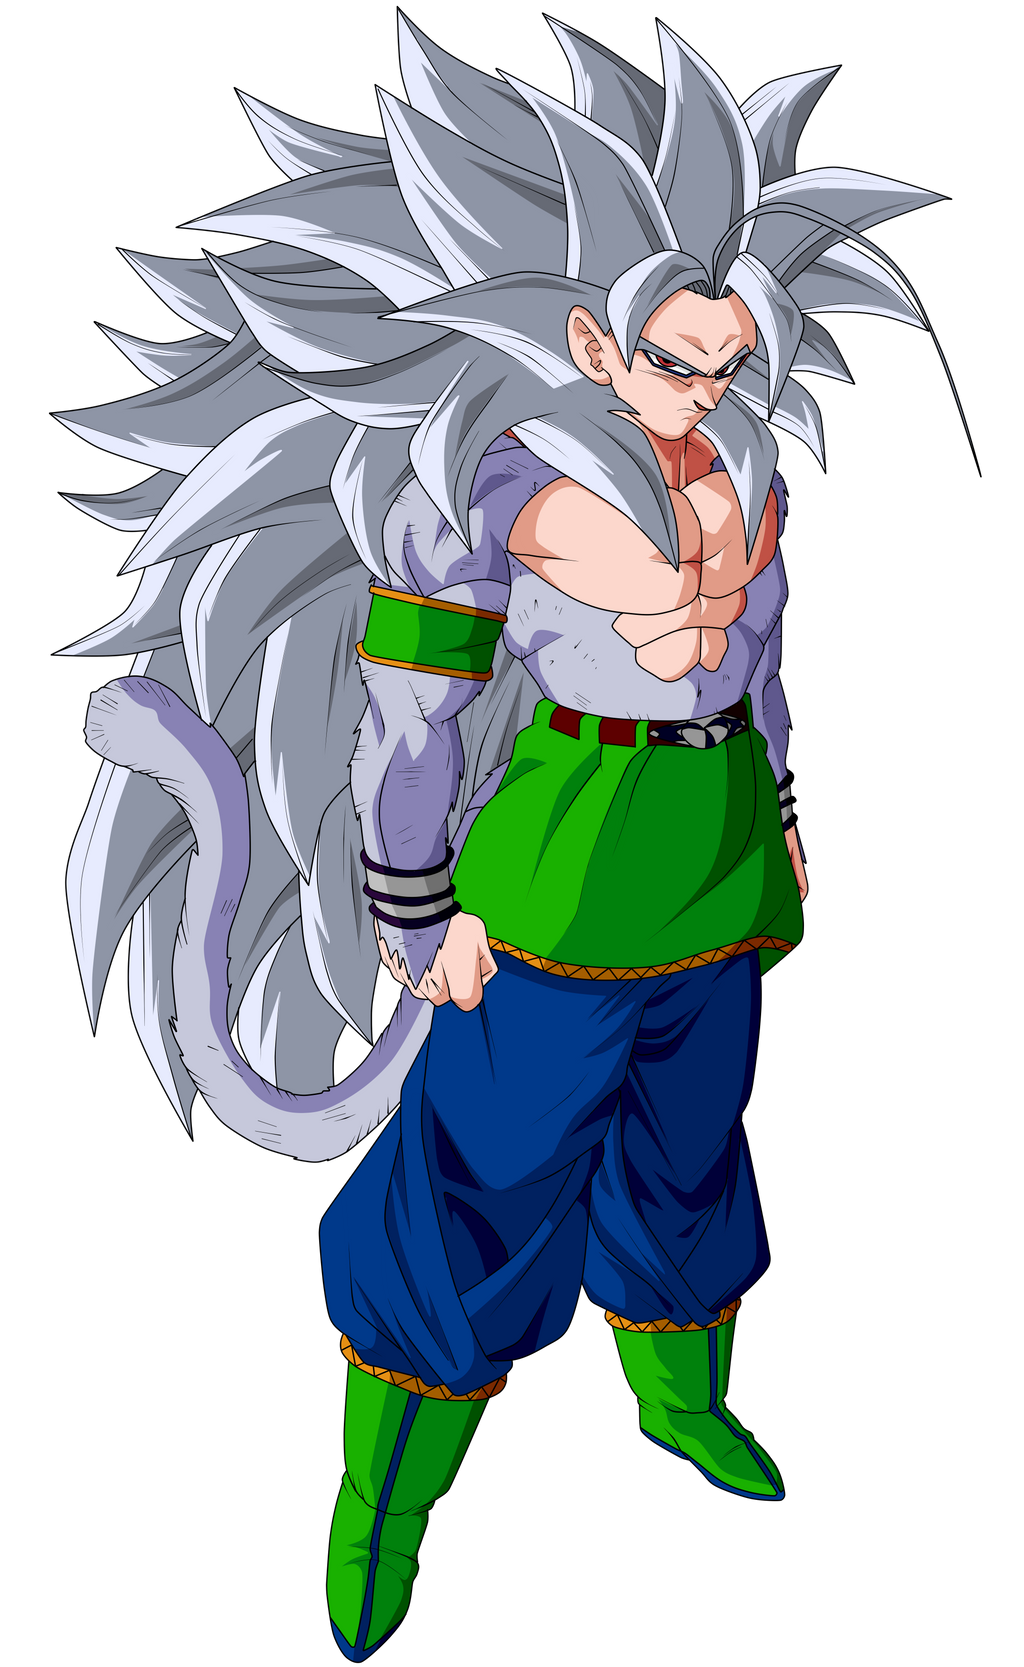 What multiplier do you think SSJ5 would have?